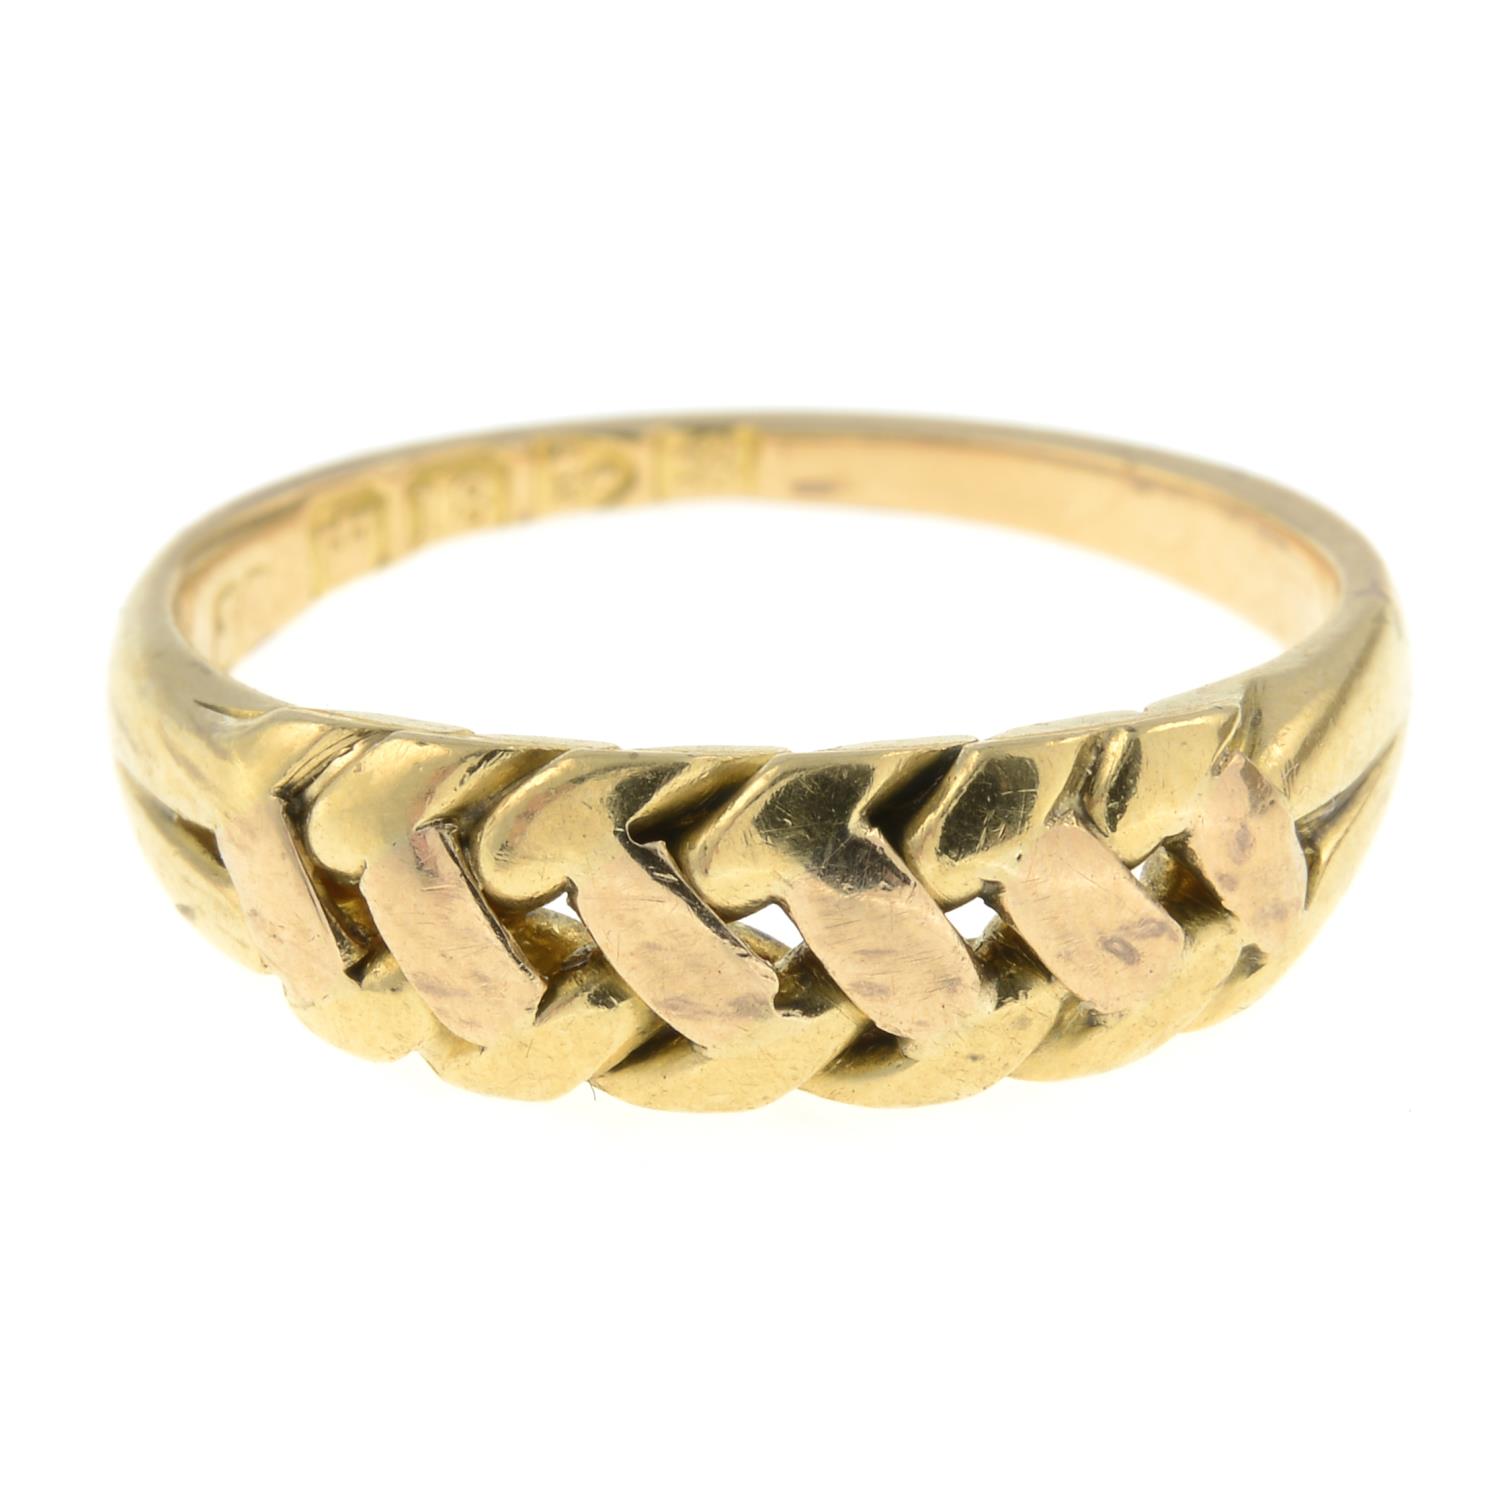 An Edwardian 18ct gold dress ring.Hallmarks for Chester, 1902.